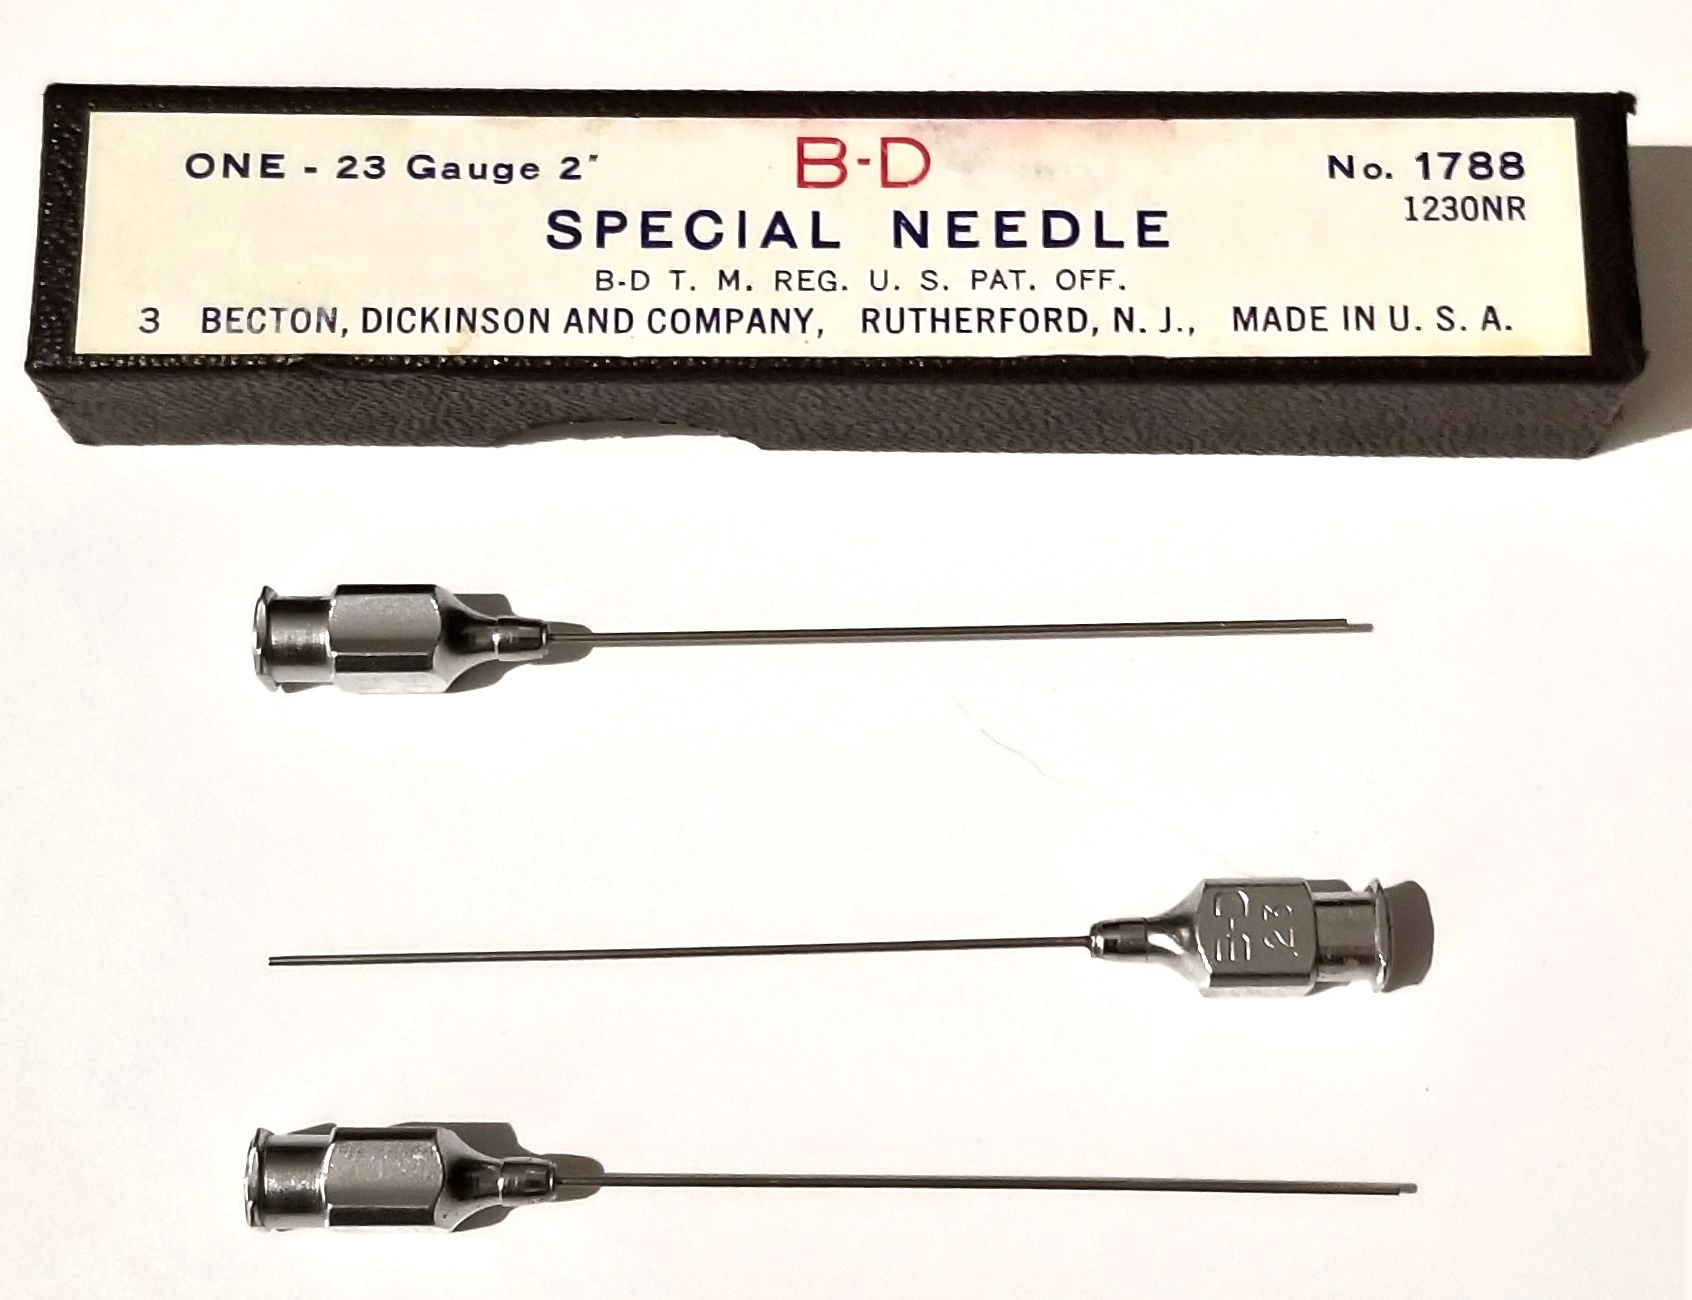 B-D 1788 Injection Needles with Luer Lock - 23 Gauge (Pack of 3)